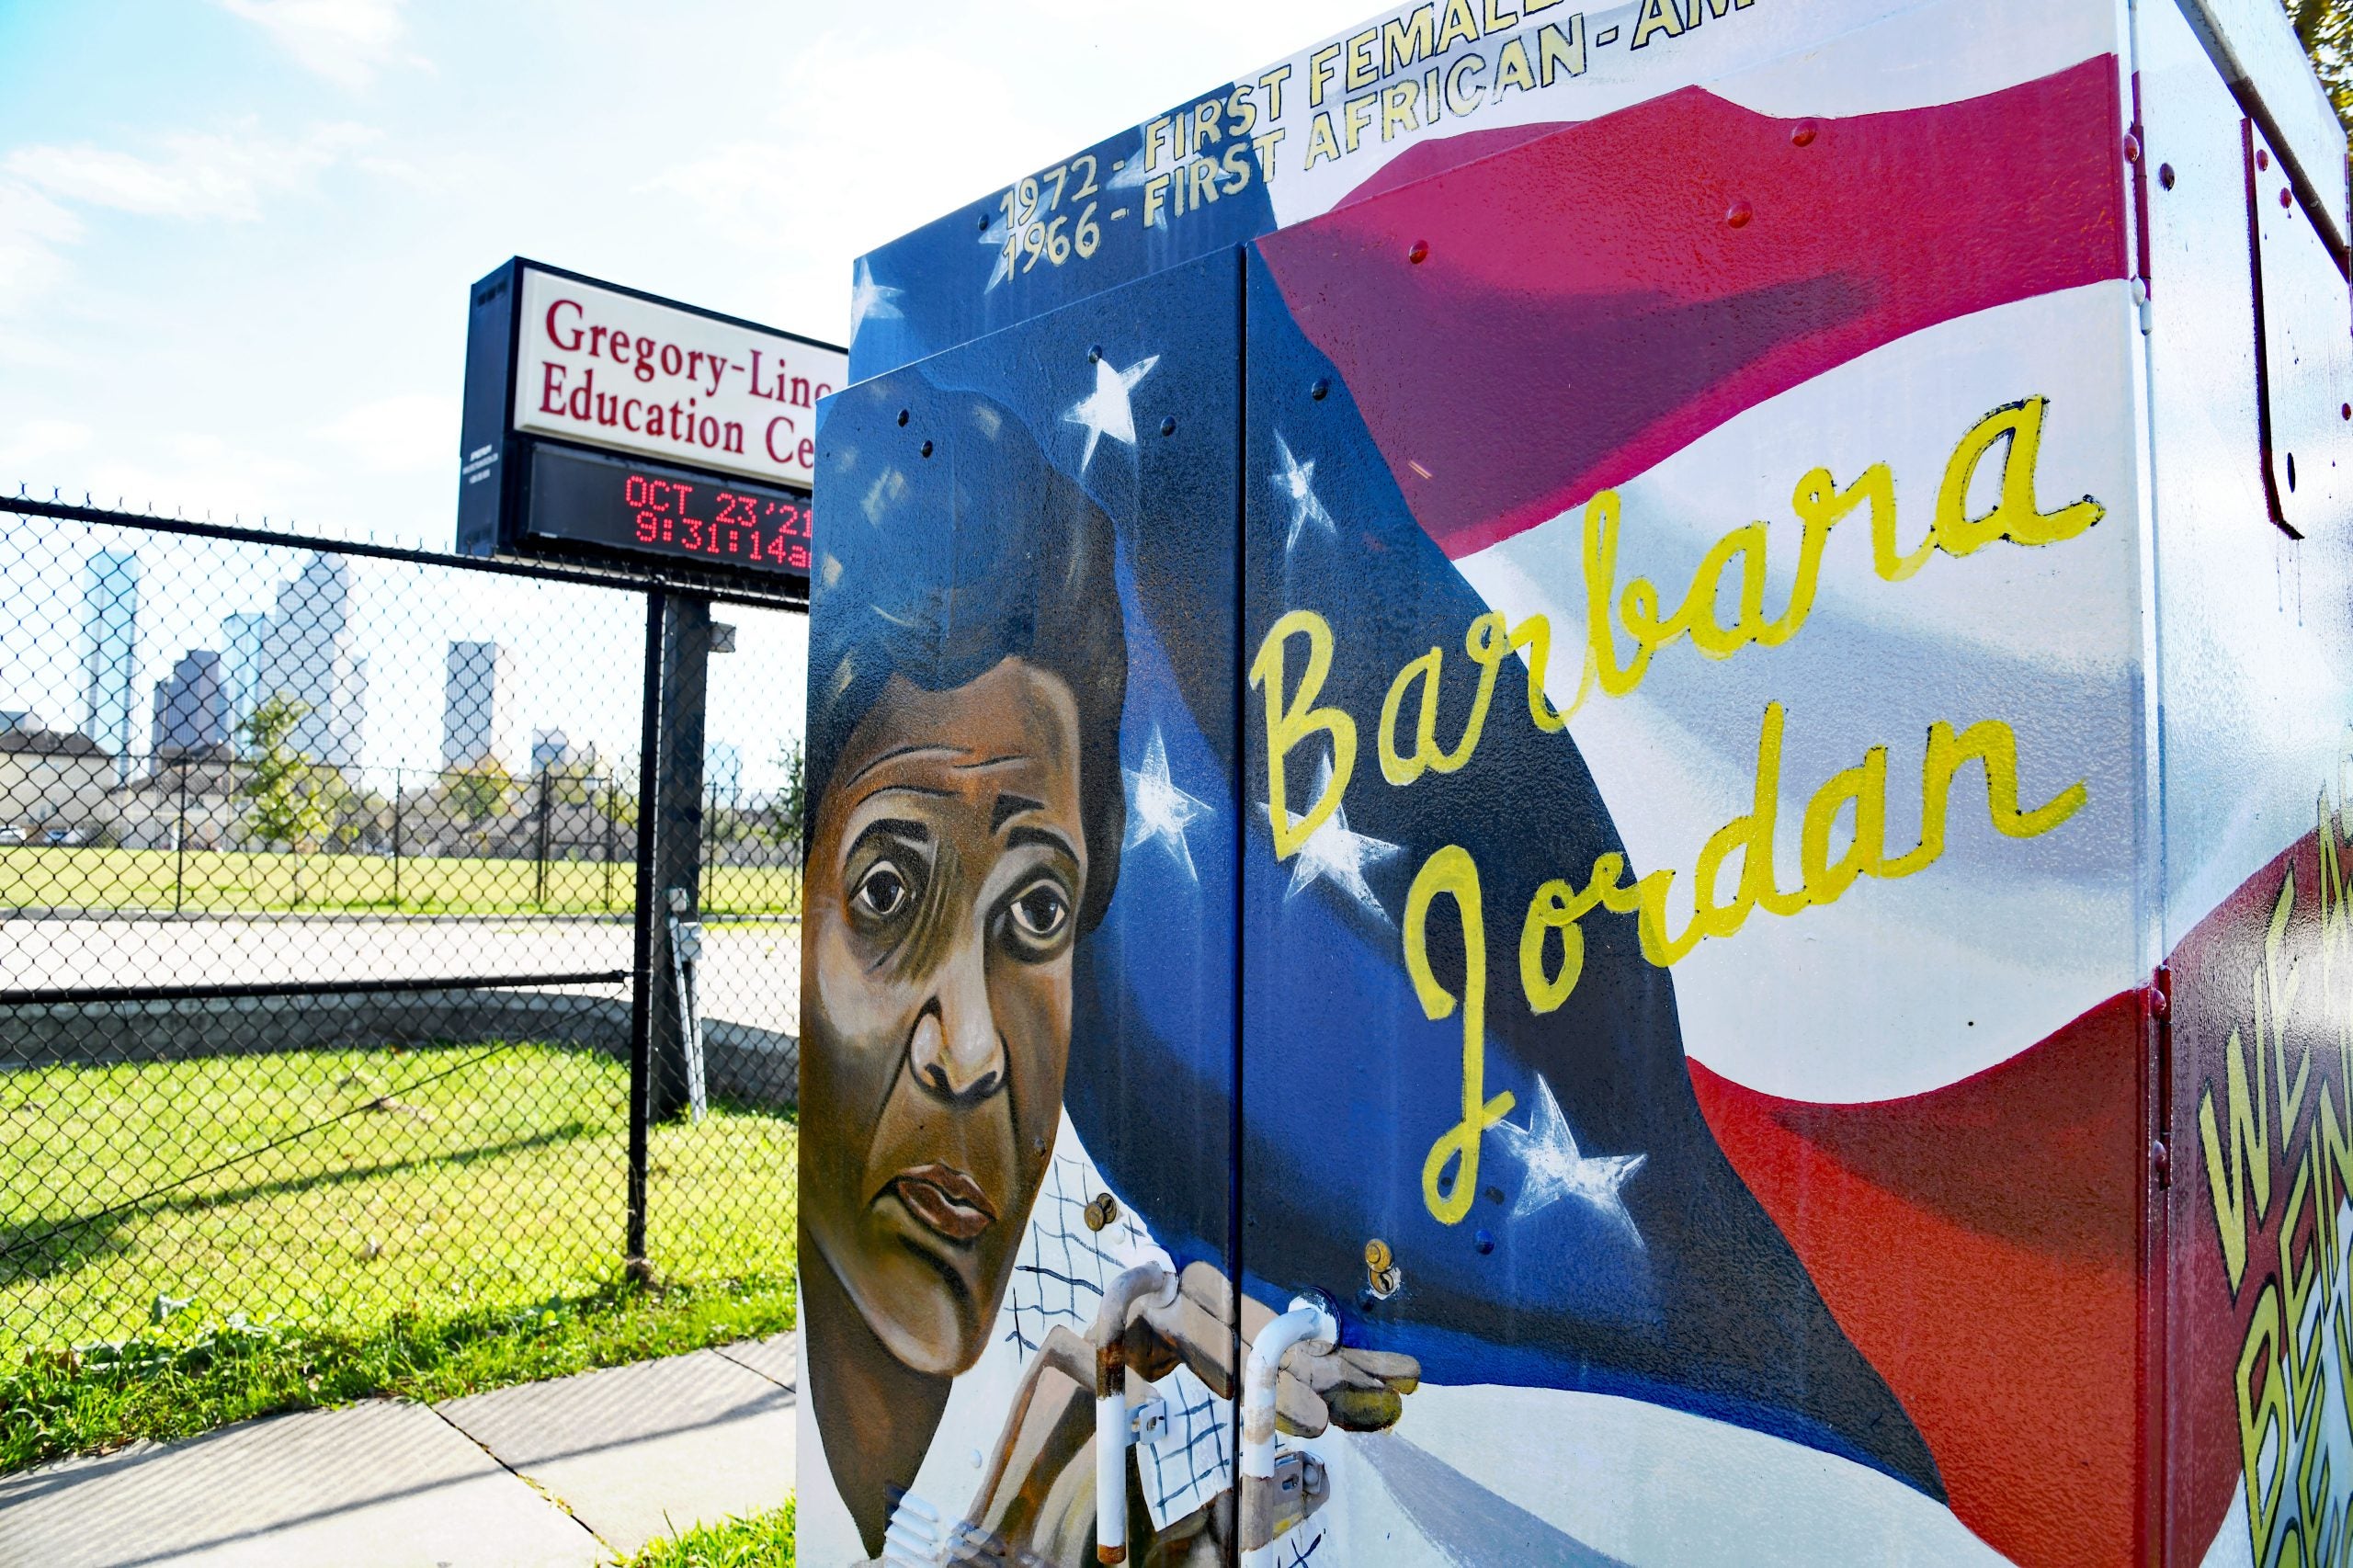 "The Rebirth In Action" Project Is Preserving Over A Century Of Black History In Houston